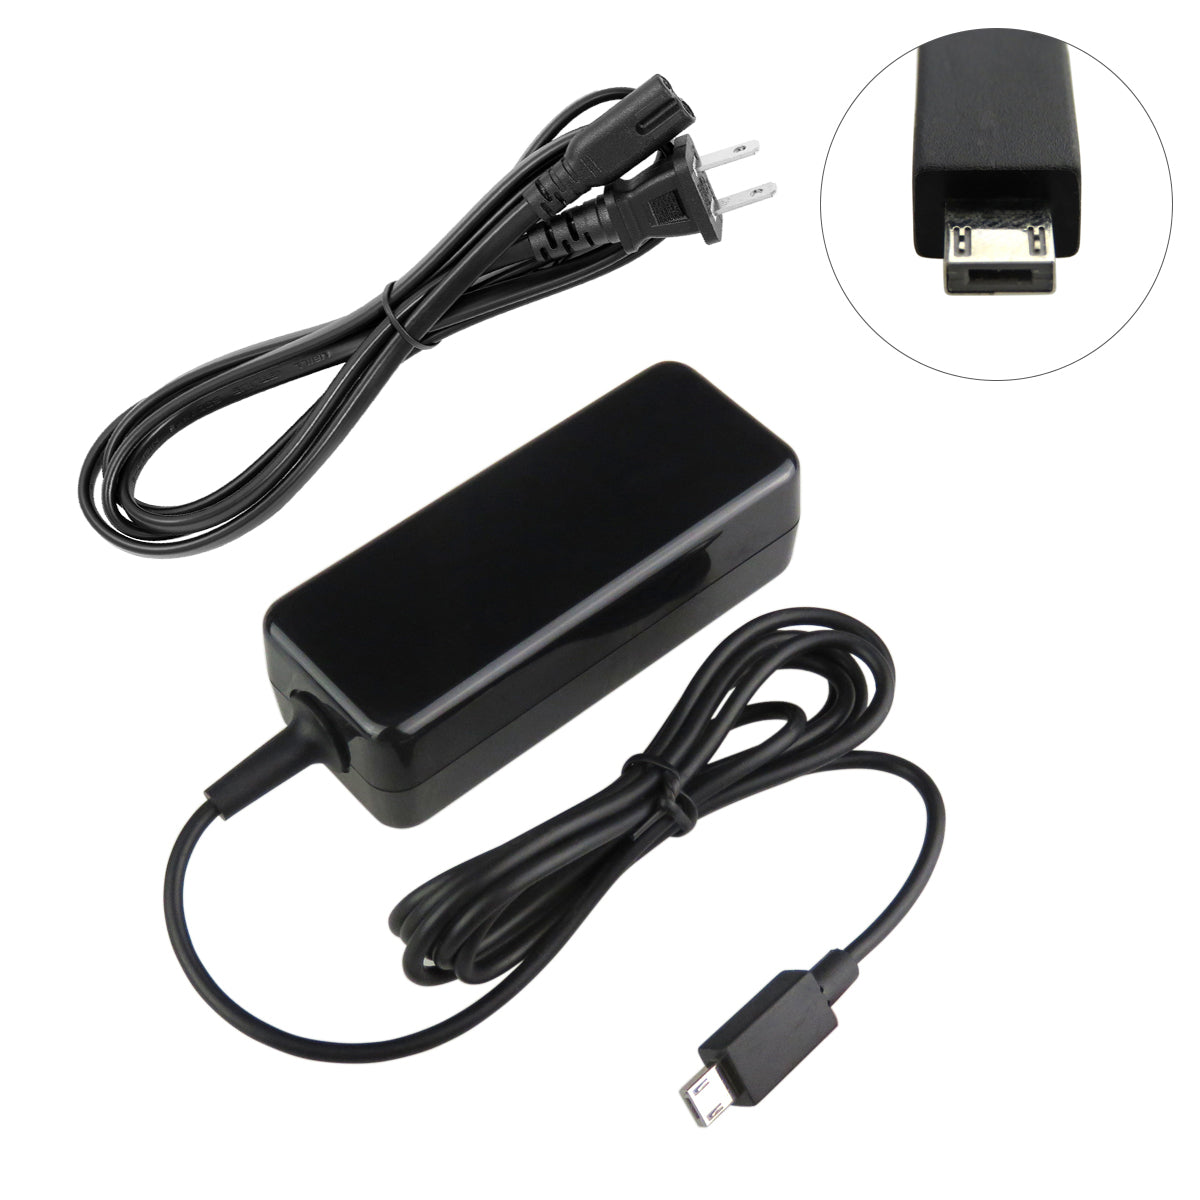 Charger for ASUS EeeBook X205TA-BING-FD015BS Laptop.